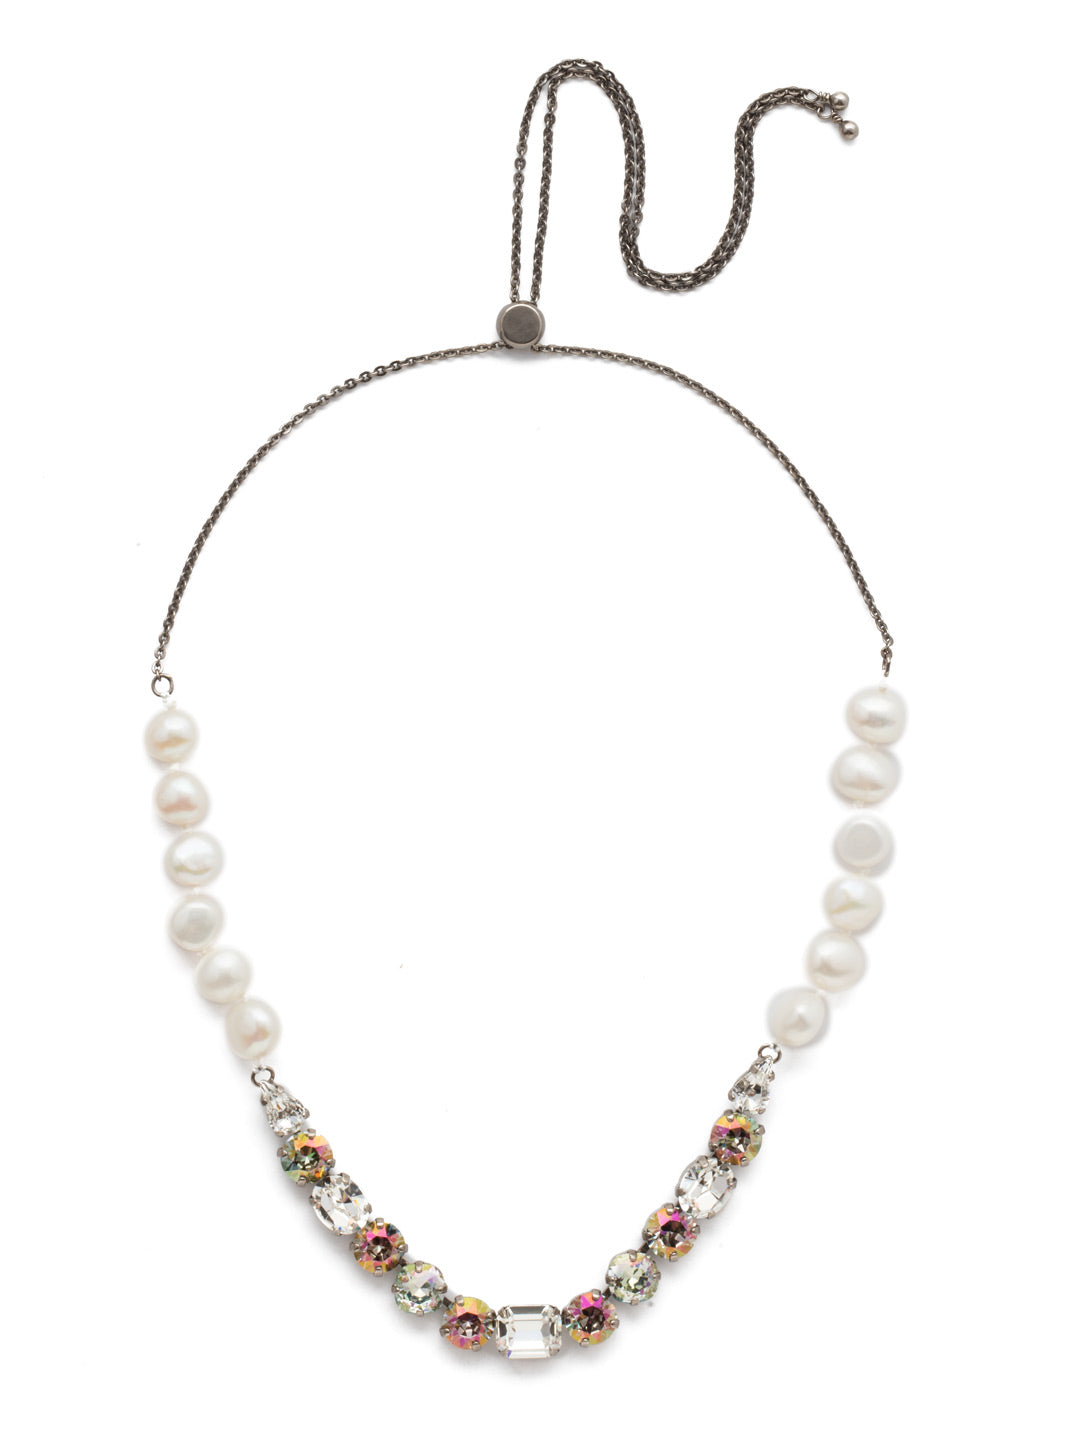 Verona Tennis Necklace - NEH26ASCRE - This classic beauty features wire-wrapped pearls supporting a delicate pattern of crystal shapes at its base with a slider clasp for easy wear. From Sorrelli's Crystal Envy collection in our Antique Silver-tone finish.